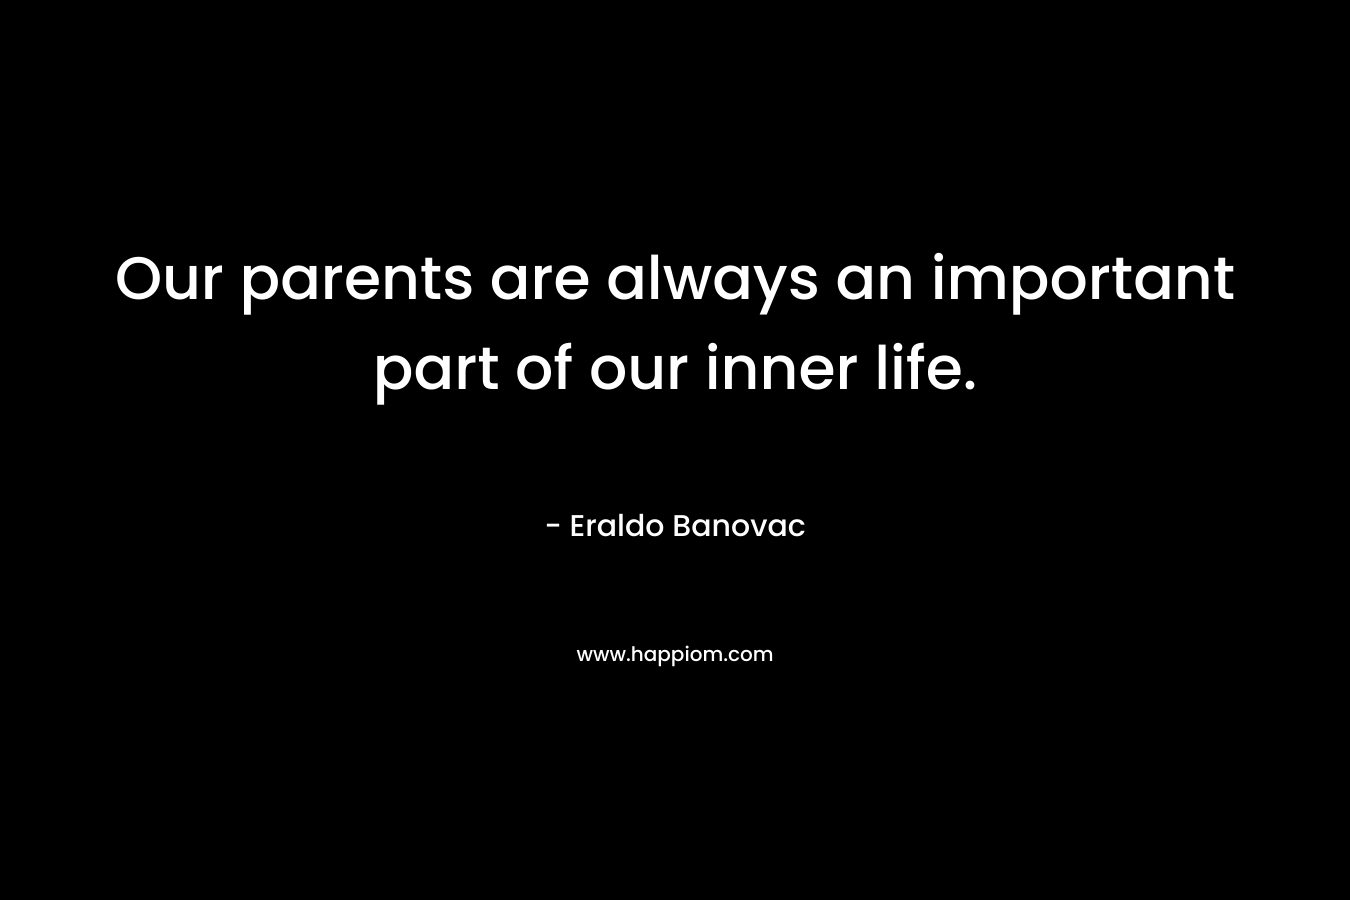 Our parents are always an important part of our inner life. – Eraldo Banovac